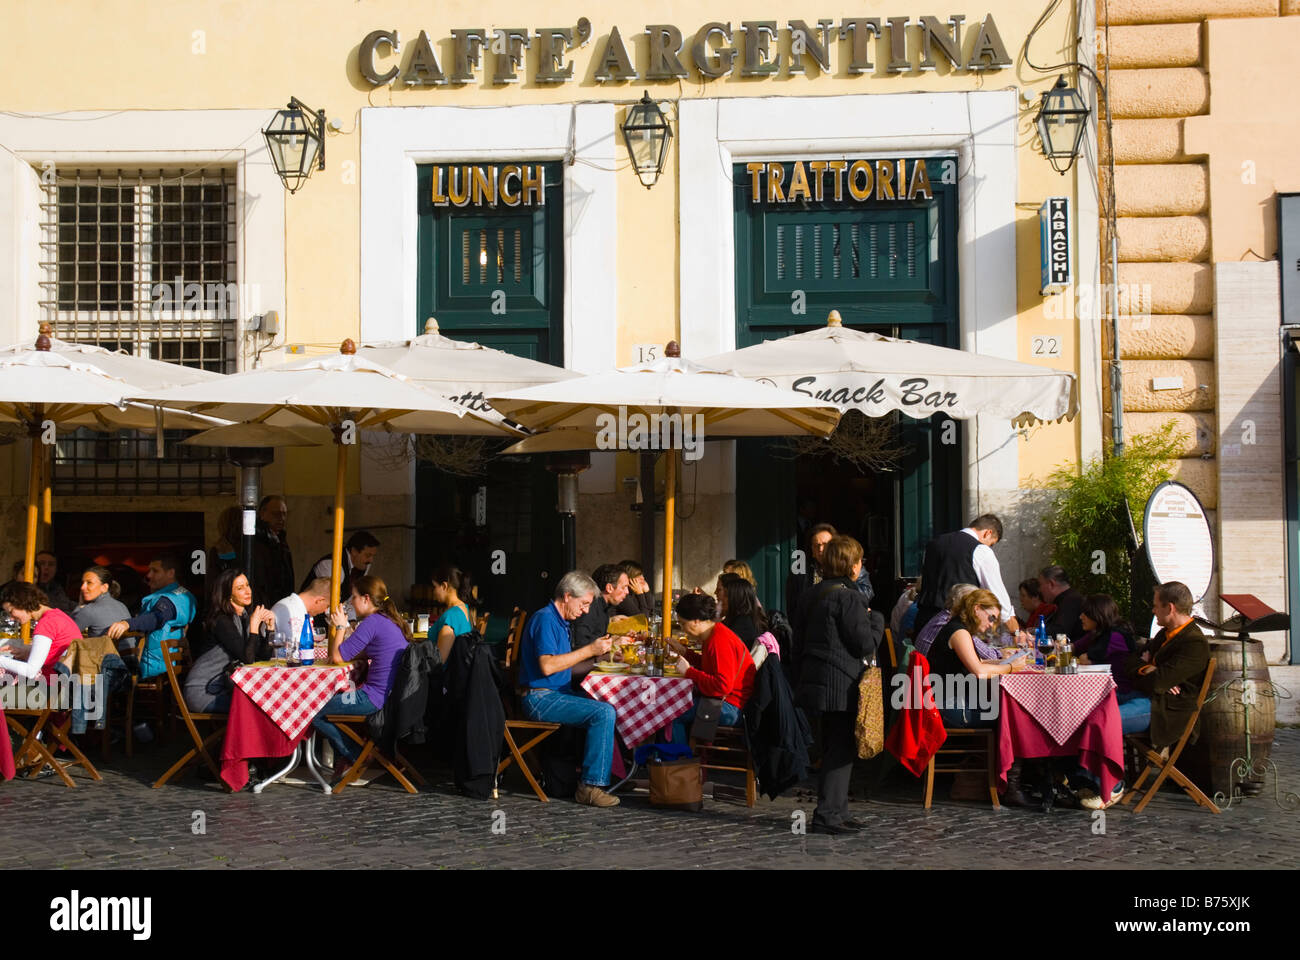 Trattoria Caffe Argentina along Via Argentina in centro storico district of Rome Italy Europe Stock Photo